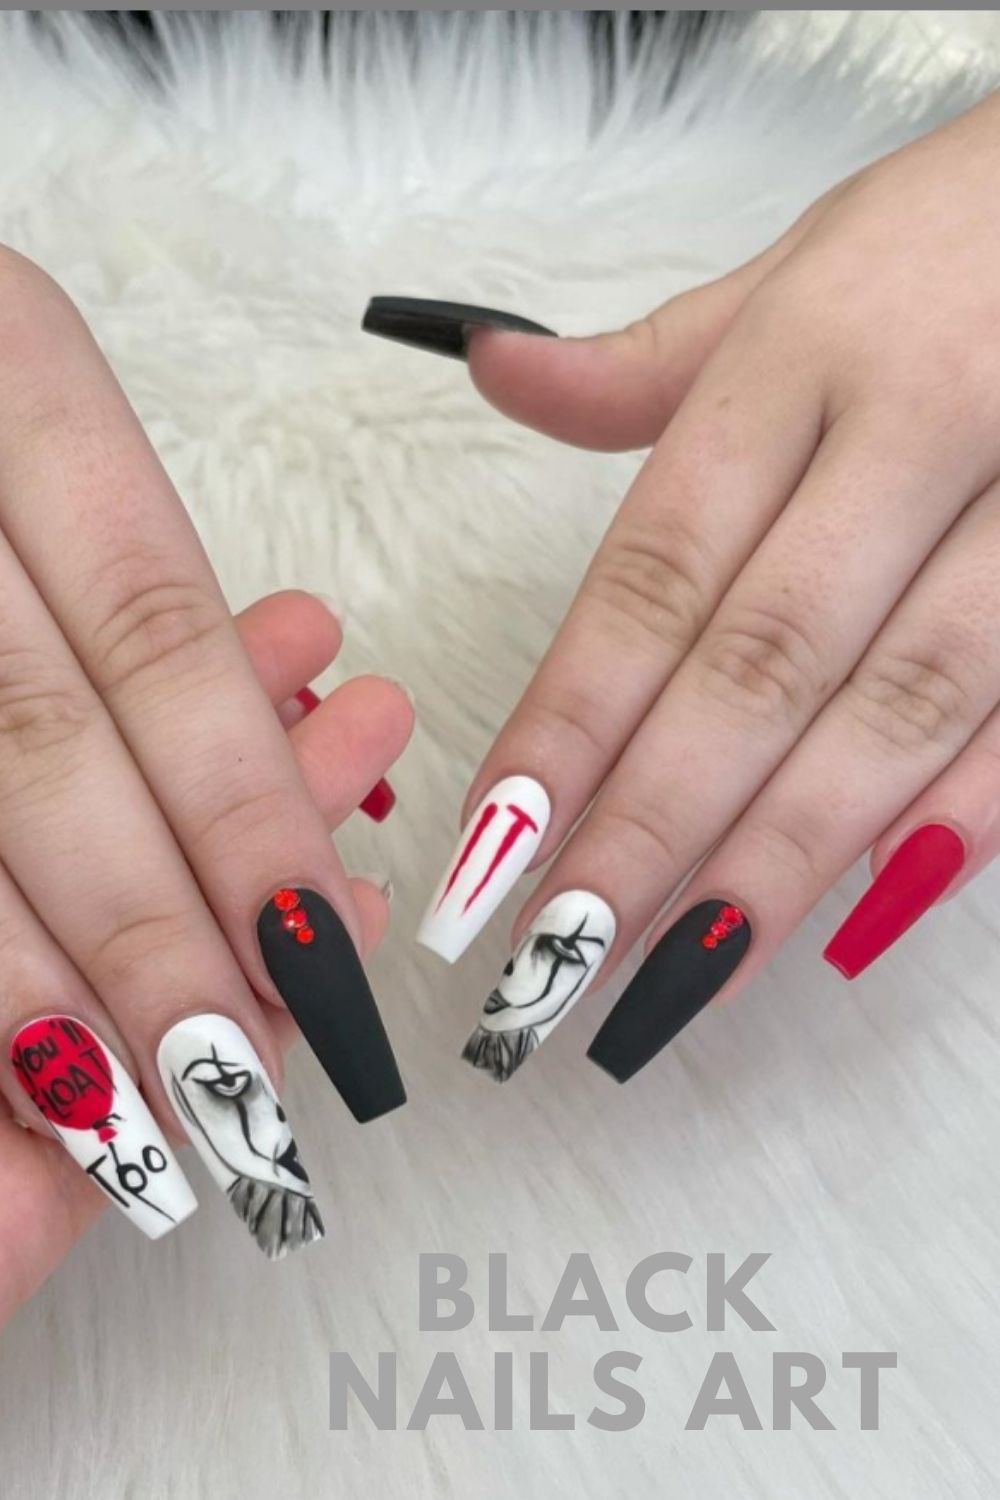 Red and black nail design